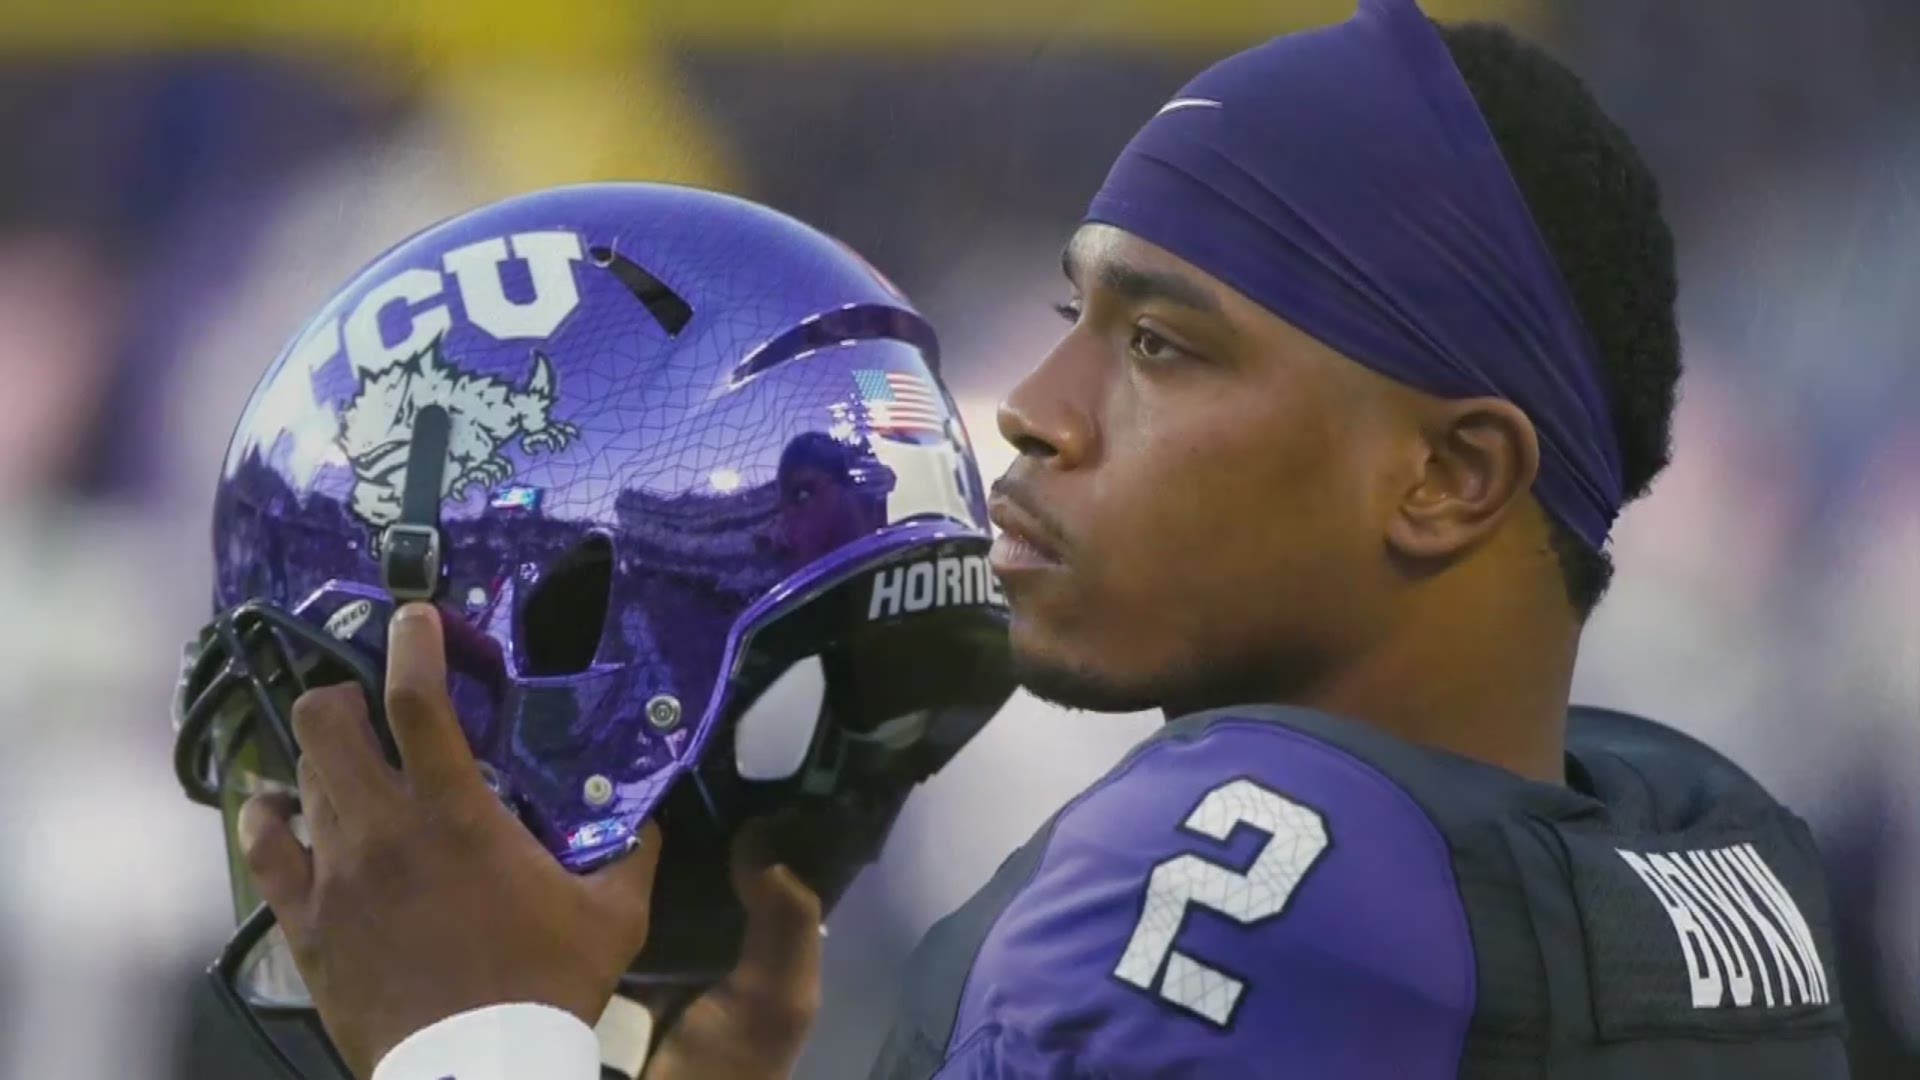 Trevone Boykin dropped from team, accused of assault